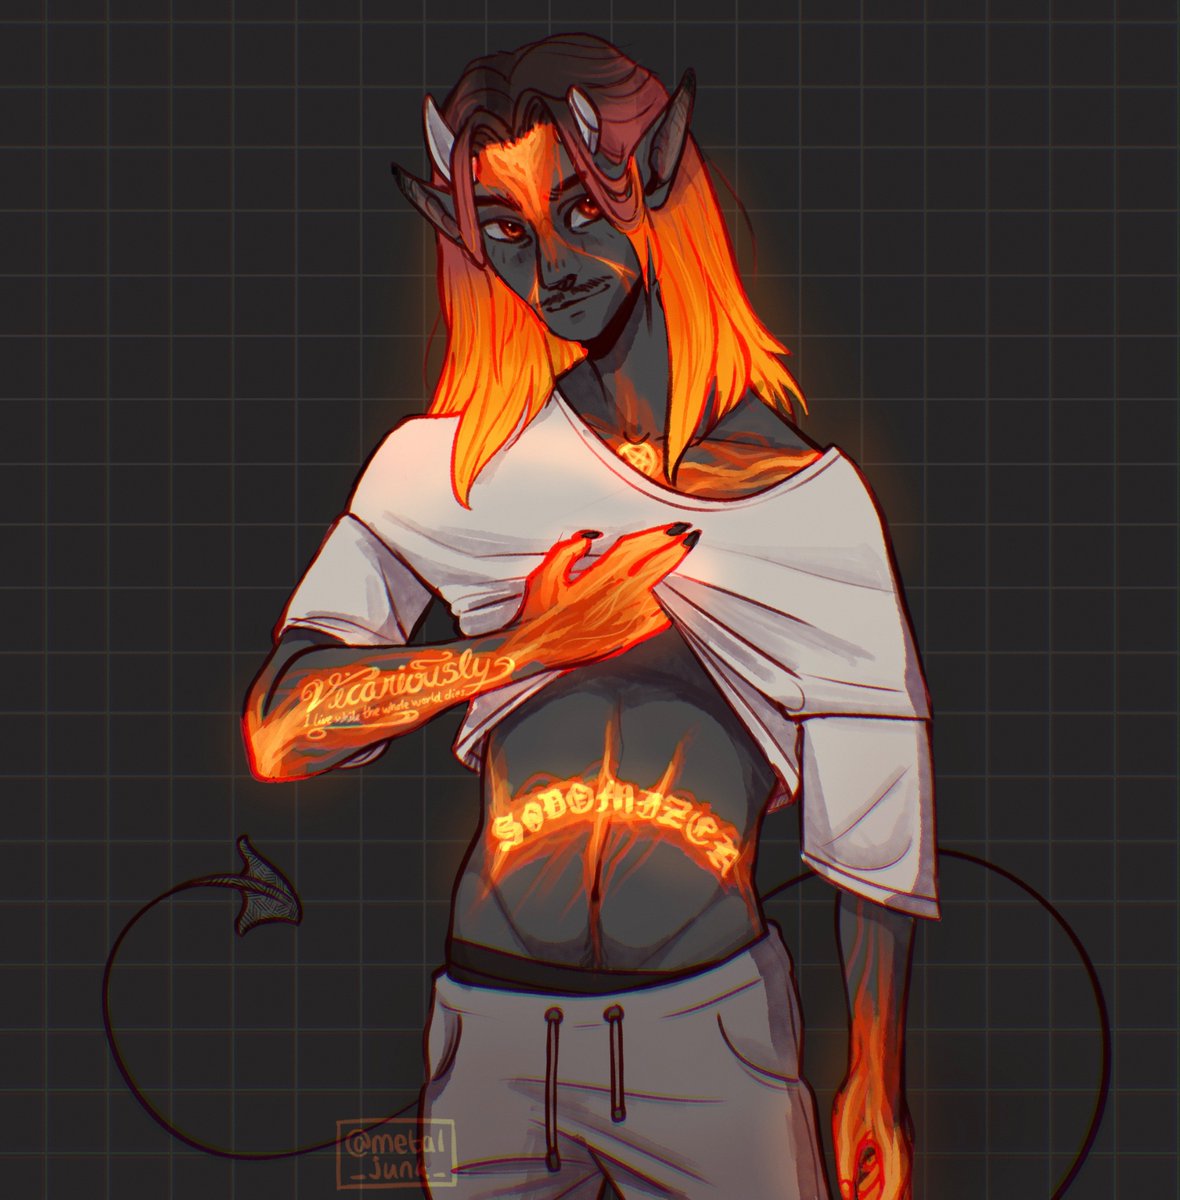 i think sodo’s tattoos would glow as well #sodoghoul #namelessghouls #GhostBand